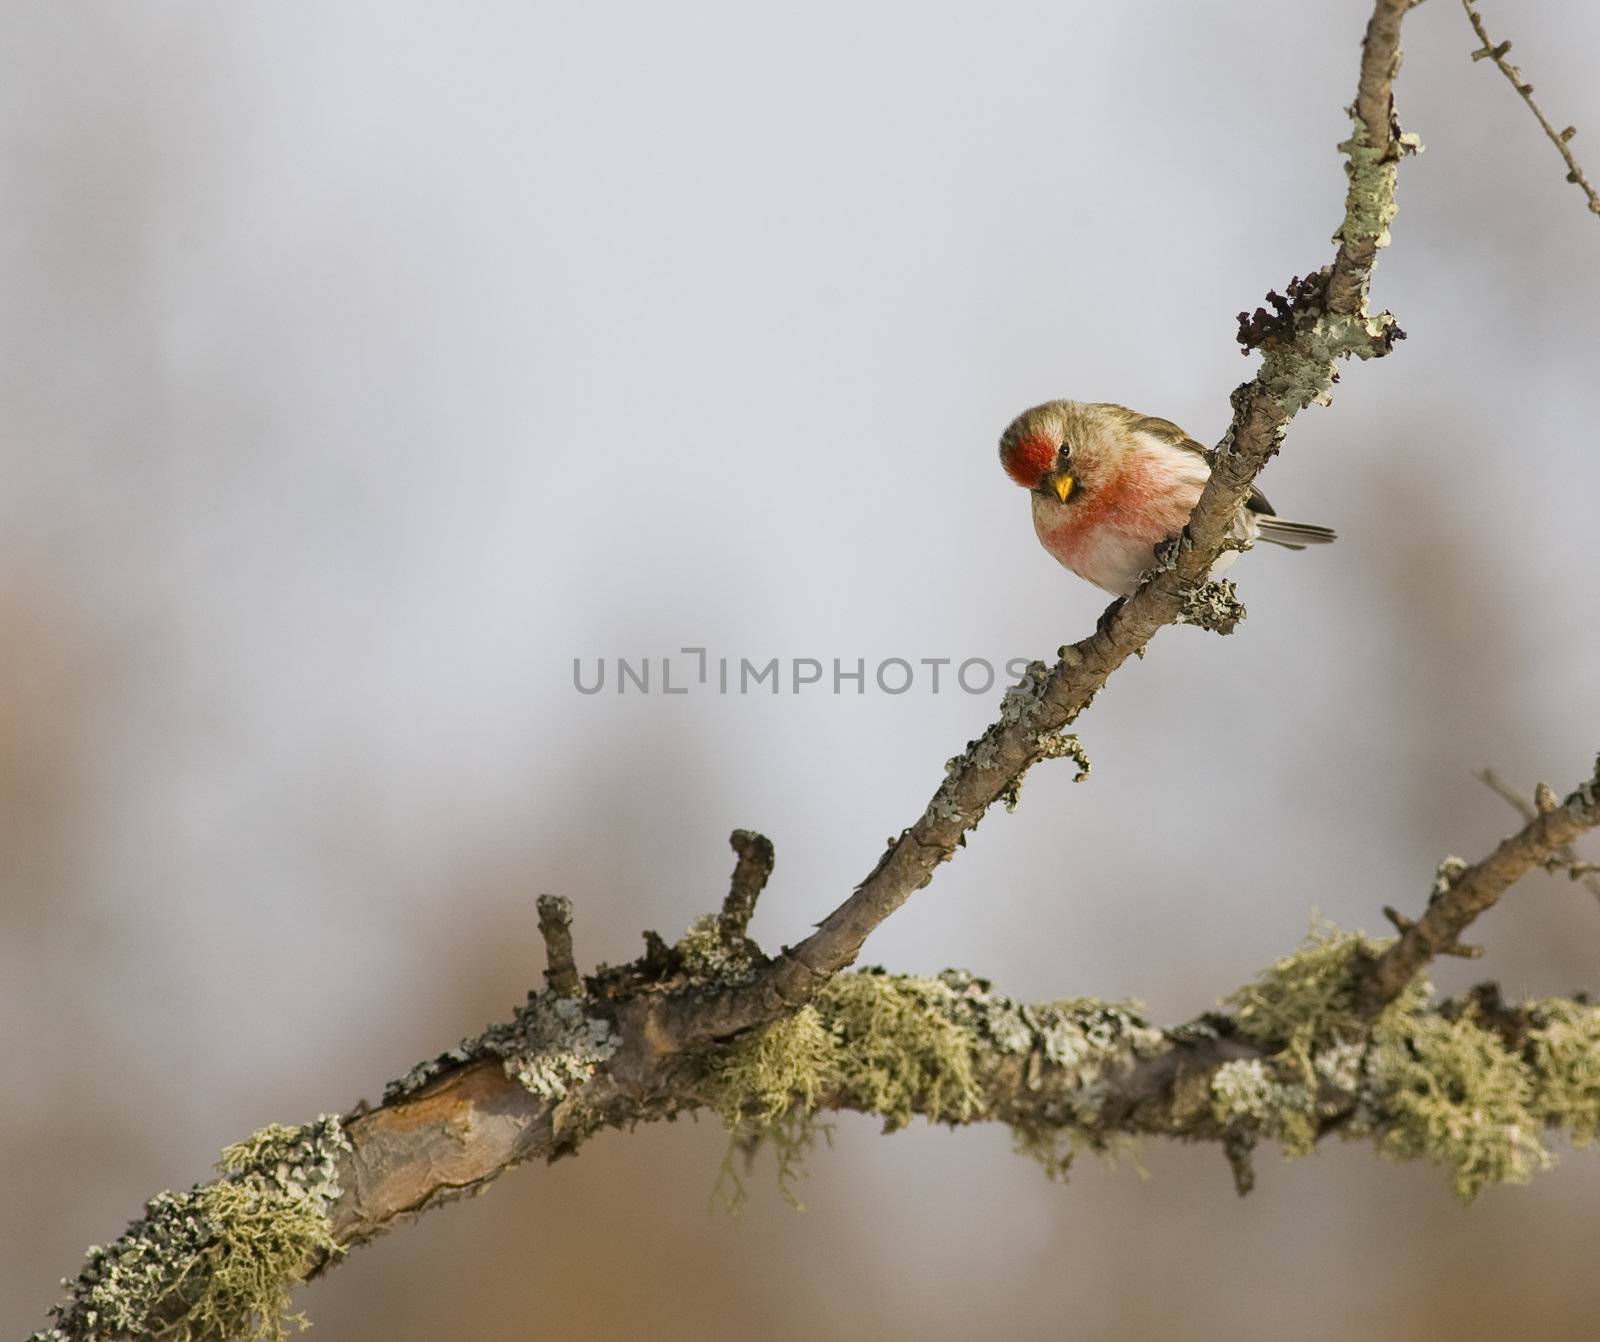 Common Redpoll ( Carduelis flammea order -  Passeriformes family - Fringillidae )a small finch found in Canada, the Northern edge of the United states and subarctic regions of Europe and Asia.